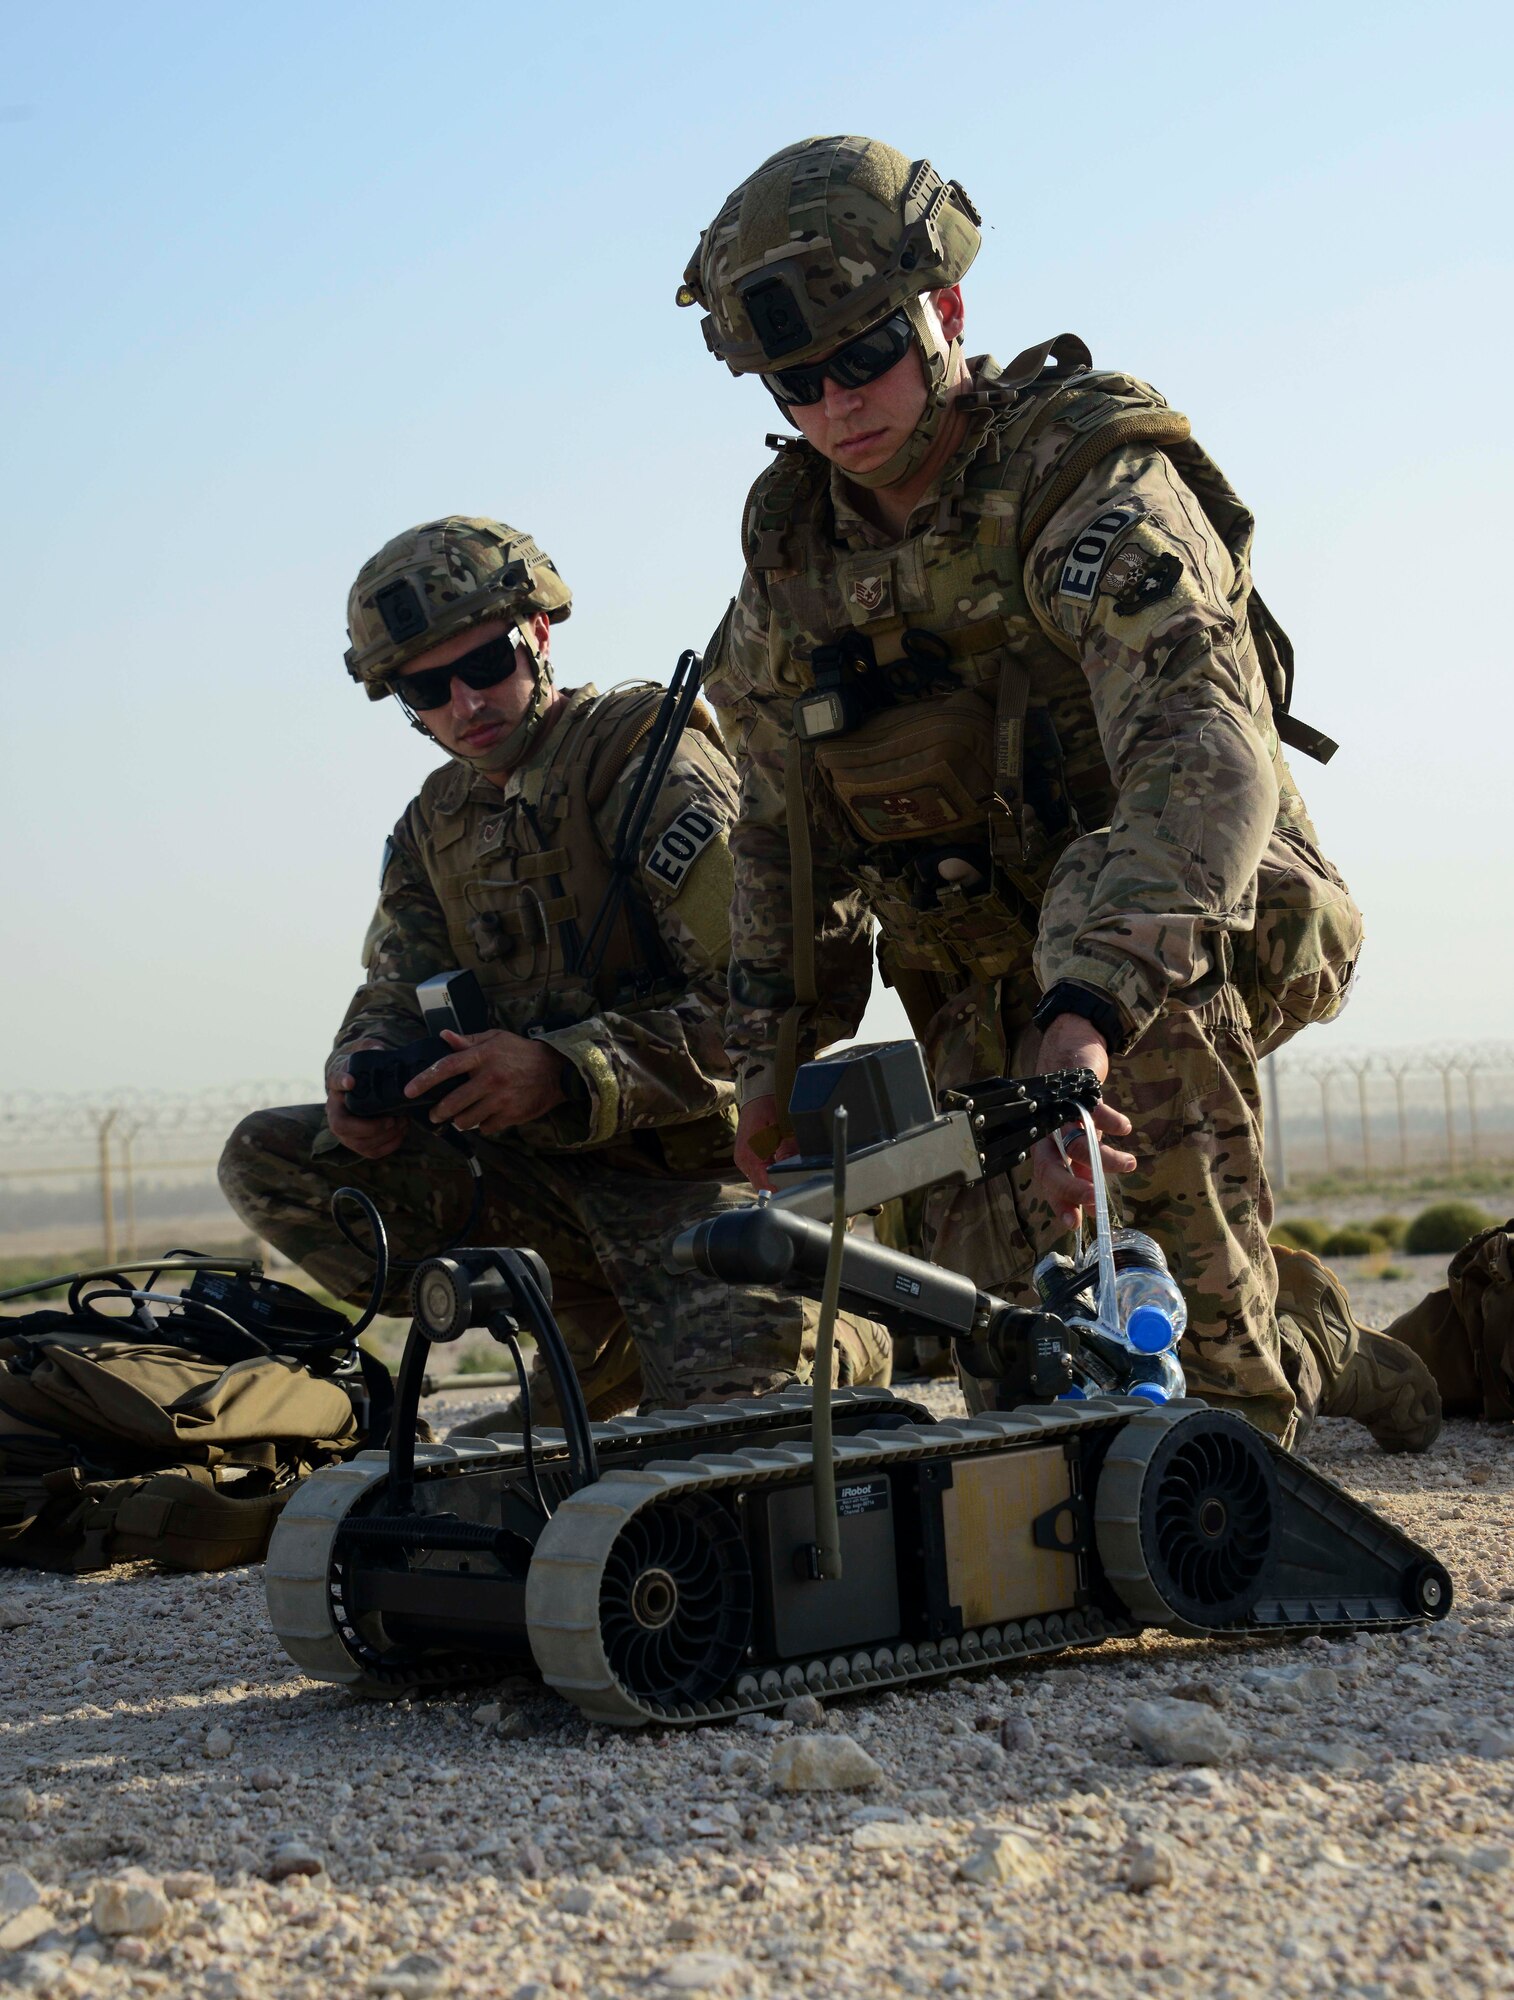 Tech Sgt. David Dickey and Staff Sgt. Darrel Linkus, both 379th Expeditionary Civil Engineer Squadron explosive ordnance disposal craftsmen, prepare to send the Pacbot 310 robot down to the location of an improvised explosive device during a training exercise May 19, 2016, at Al Udeid Air Base, Qatar. EOD Airmen are trained to detect, disarm, detonate and dispose of explosive threats all over the world. (U.S. Air Force photo/Senior Airman Janelle Patiño/Released)